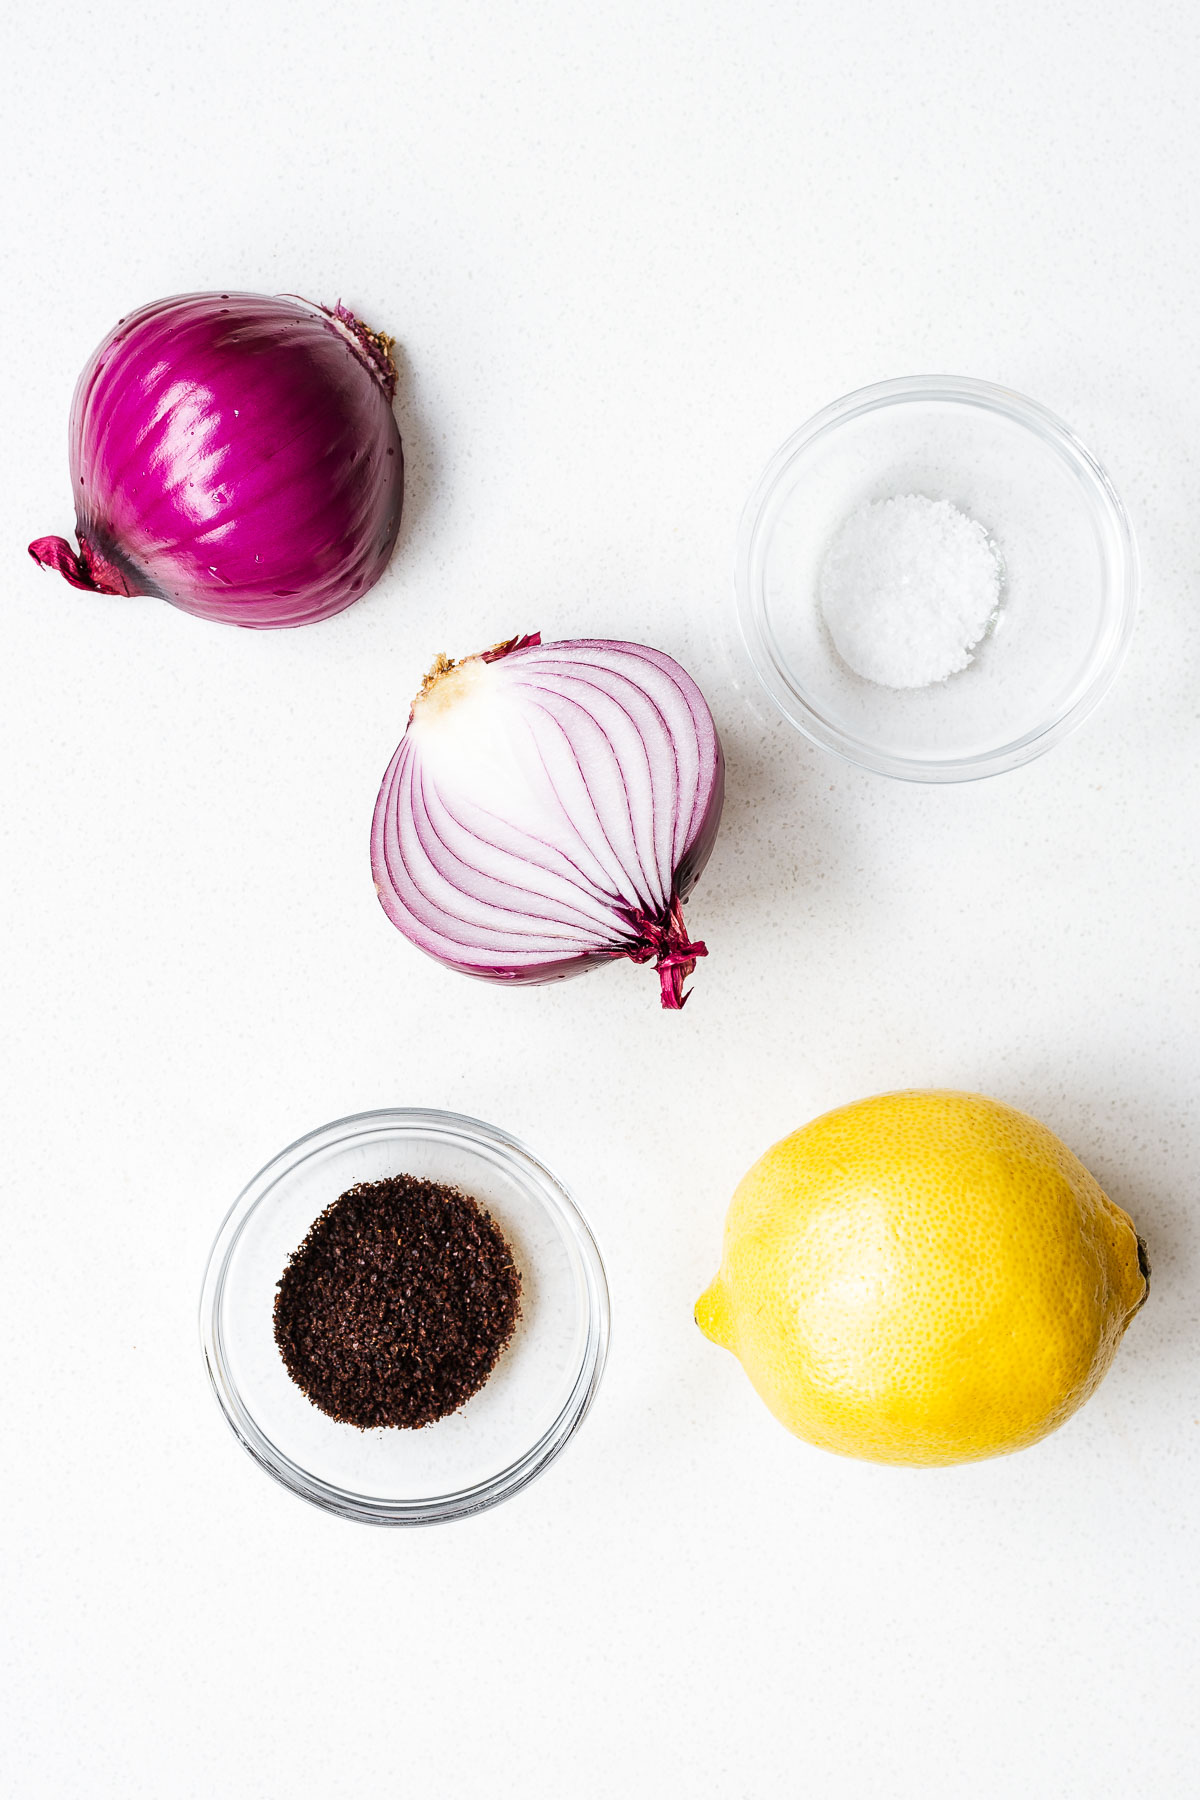 The ingredients for sumac onions including a red onions, lemon juice, sumac powder and salt.